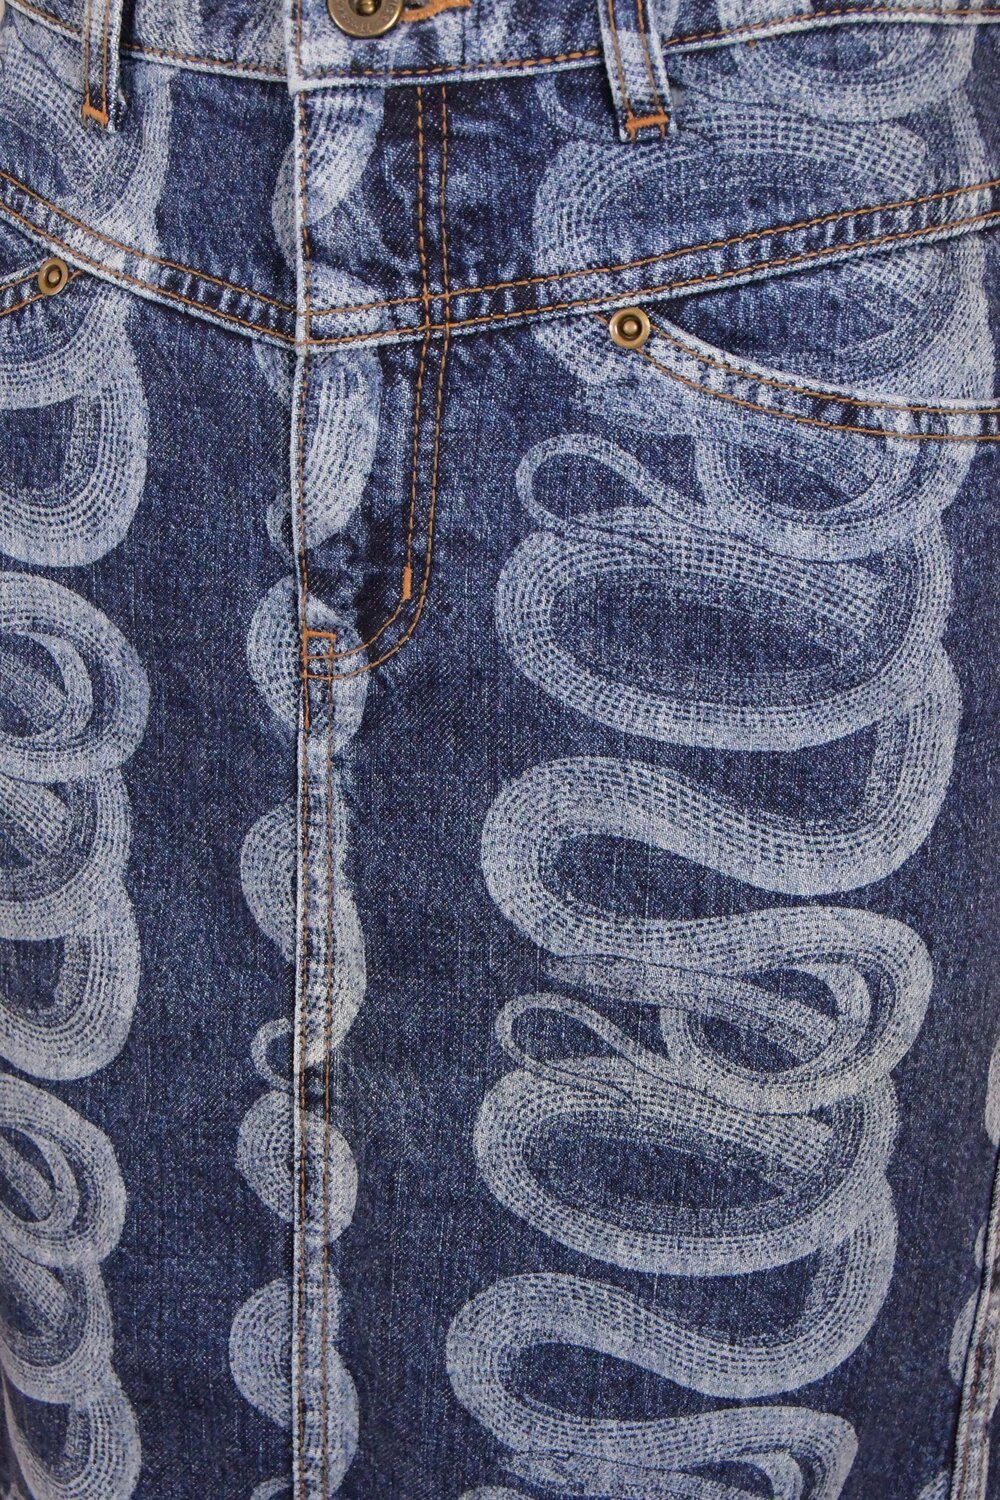 Hysteric Glamour 90s Snake Print Denim (XS/S) — Boontique